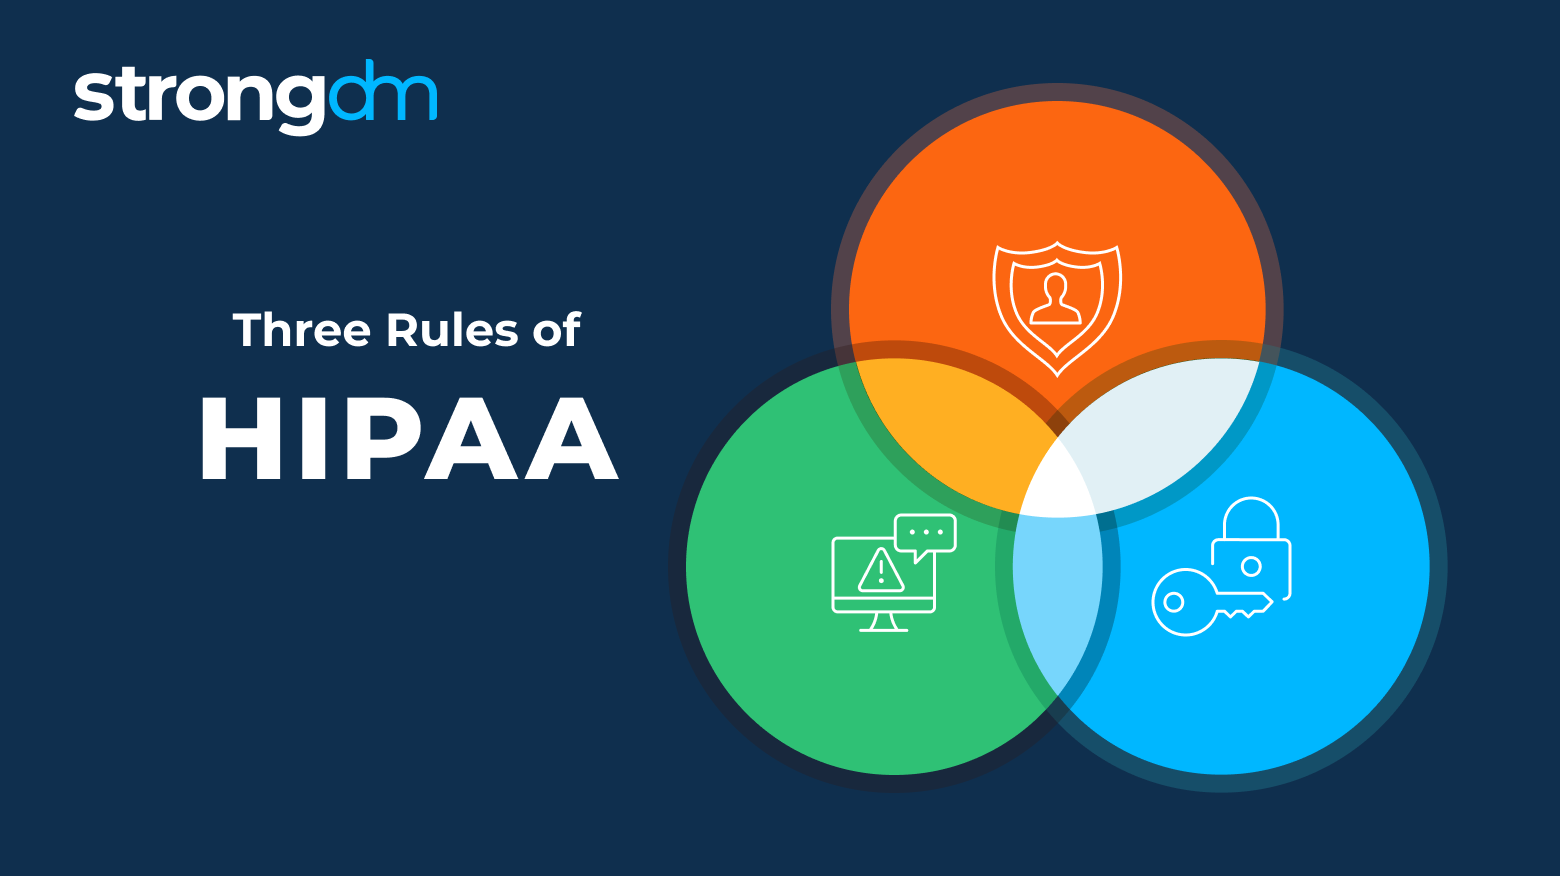 What Are the Three Rules of HIPAA? Explained